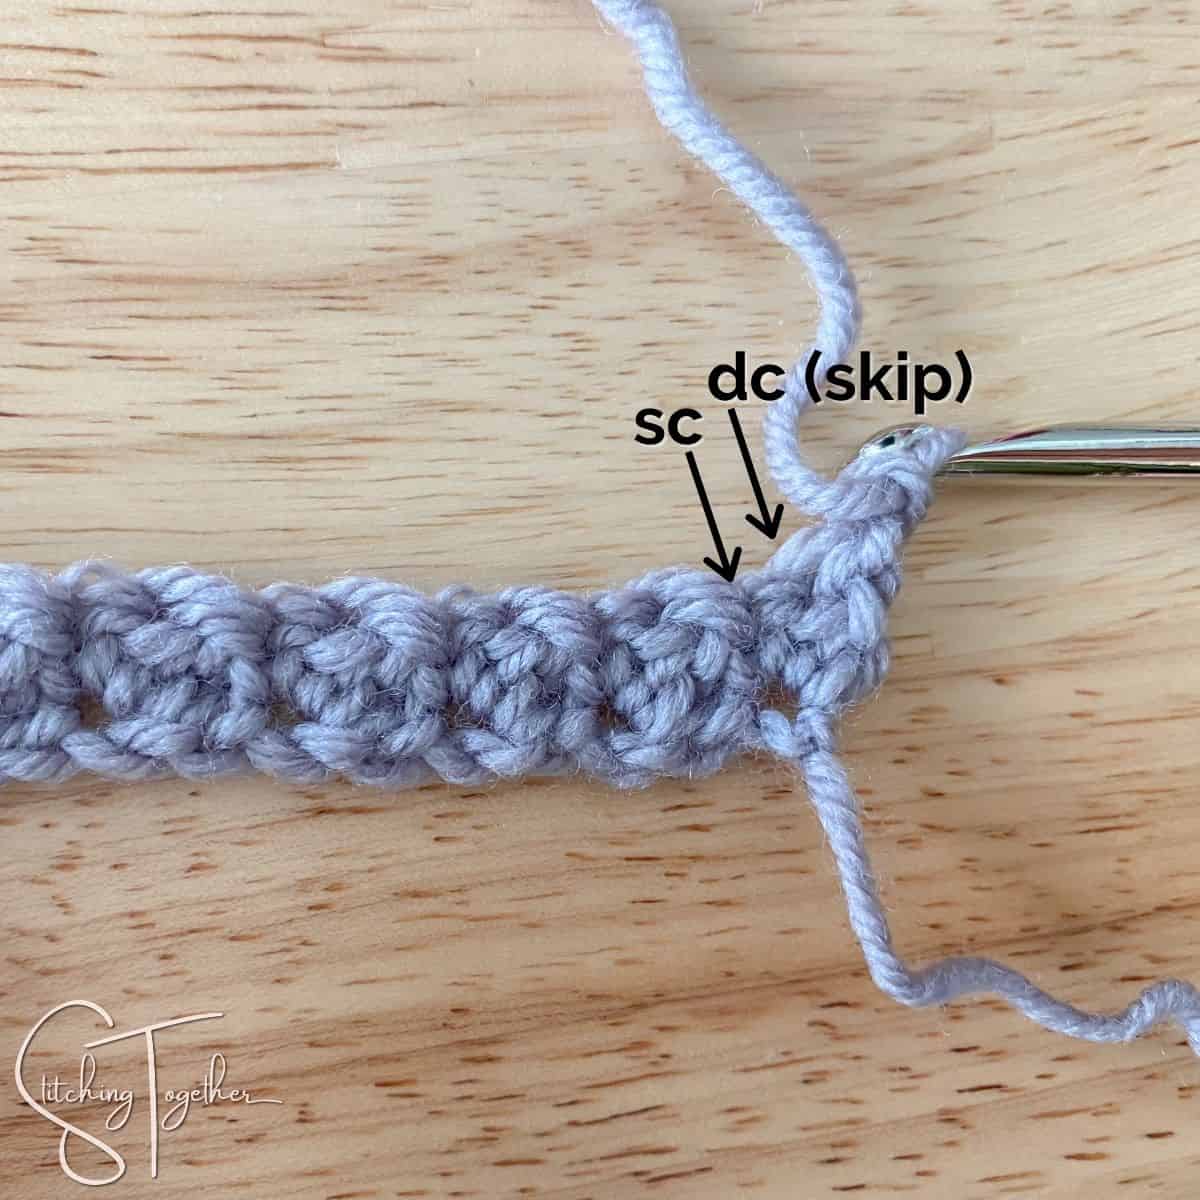 crochet swatch showing where the double and single crochet stitches are